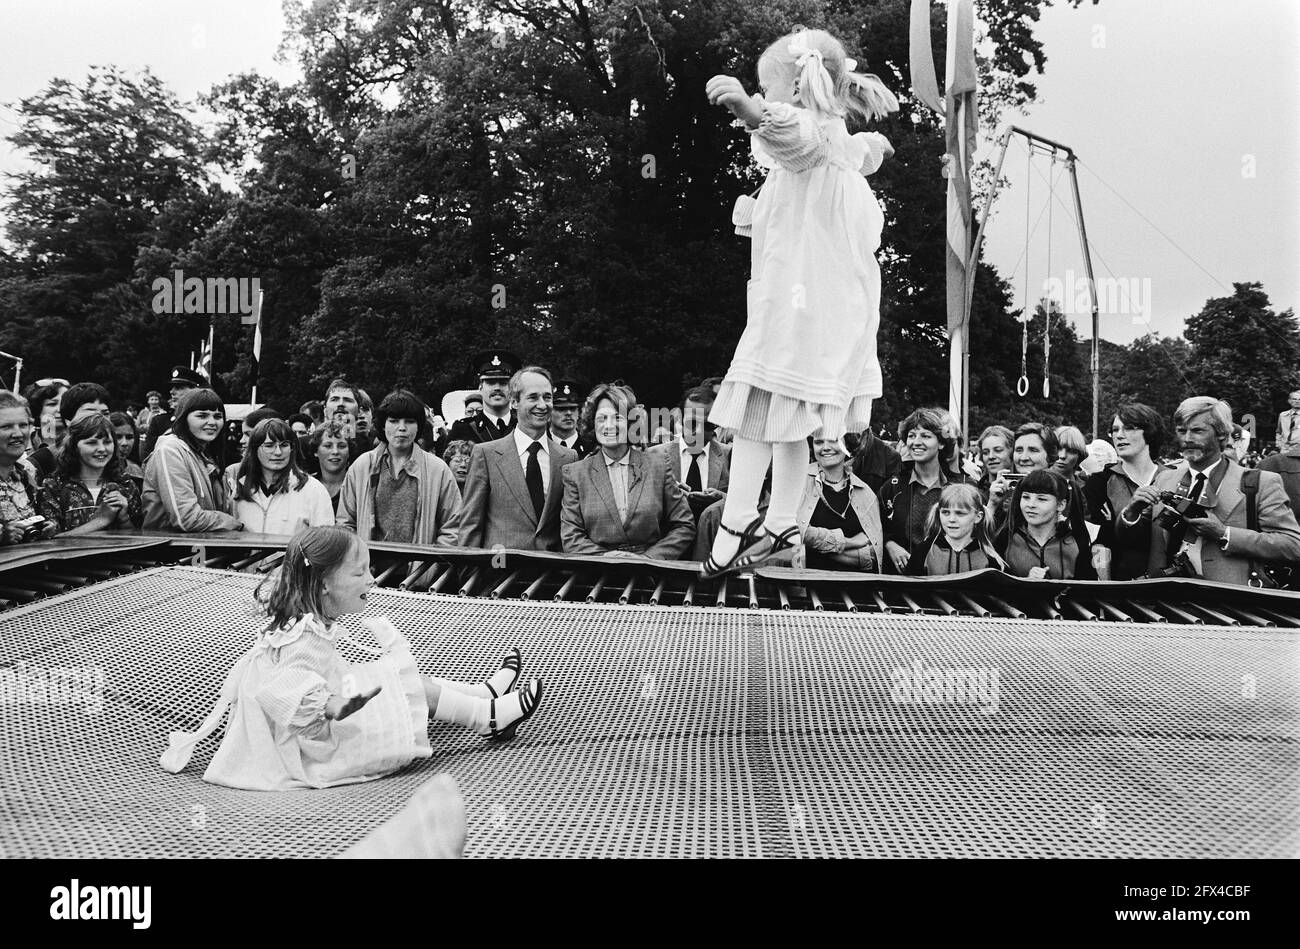 Defile Soestdijk, last; during walk across the center grounds; under the  watchful eye of Princess Irene and Carlos, their daughters jump on the  trampoline, May 31, 1980, Defiles, The Netherlands, 20th century